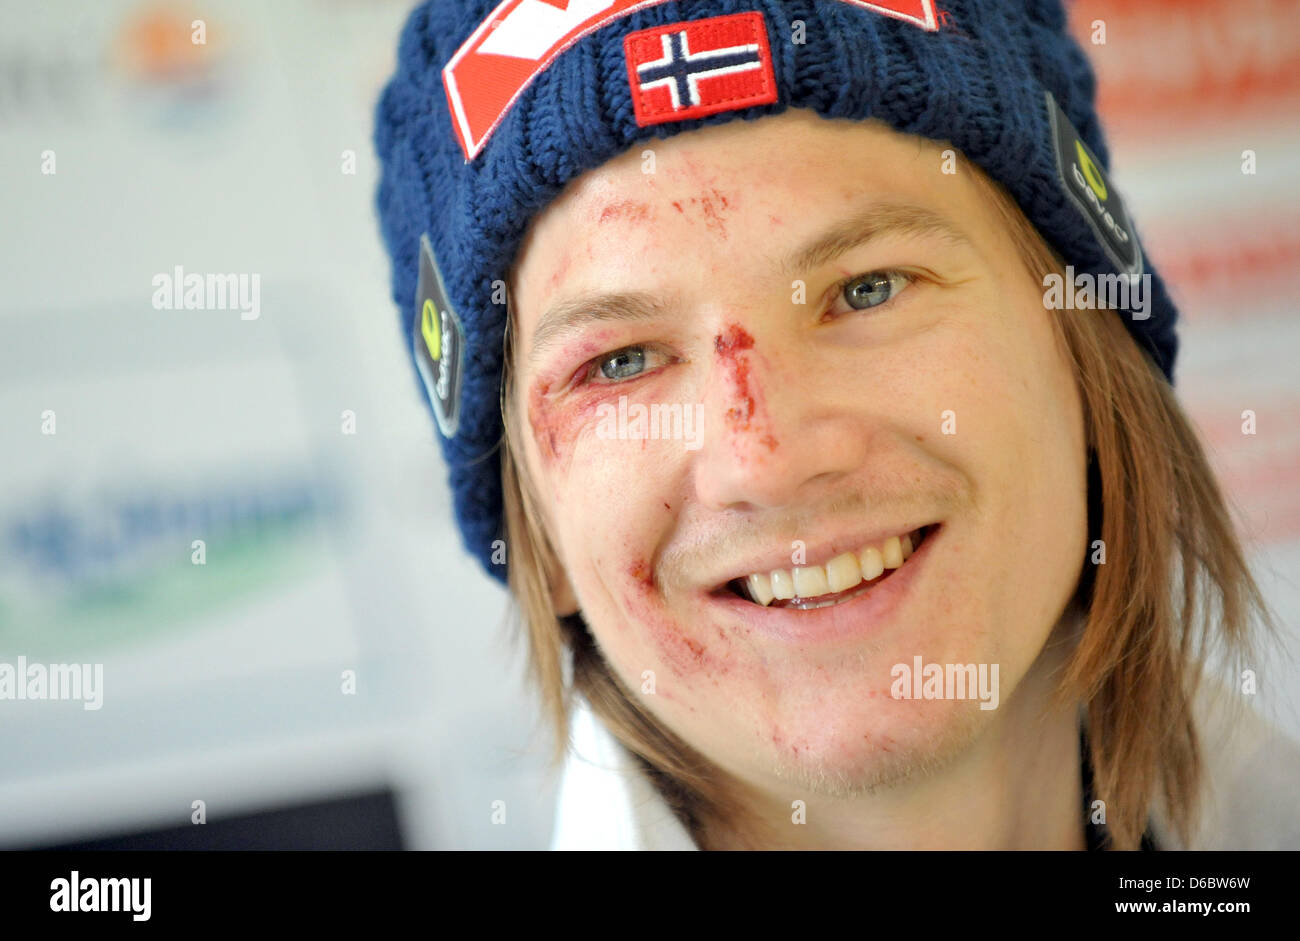 Norwegian ski jumper Tom Hilde is present at a press conference in  Garmisch-Partenkirchen, Germany, 01 January 2012. Hilde crashed hard during  the opening jumping competition of the 60th Four Hills Tournament in